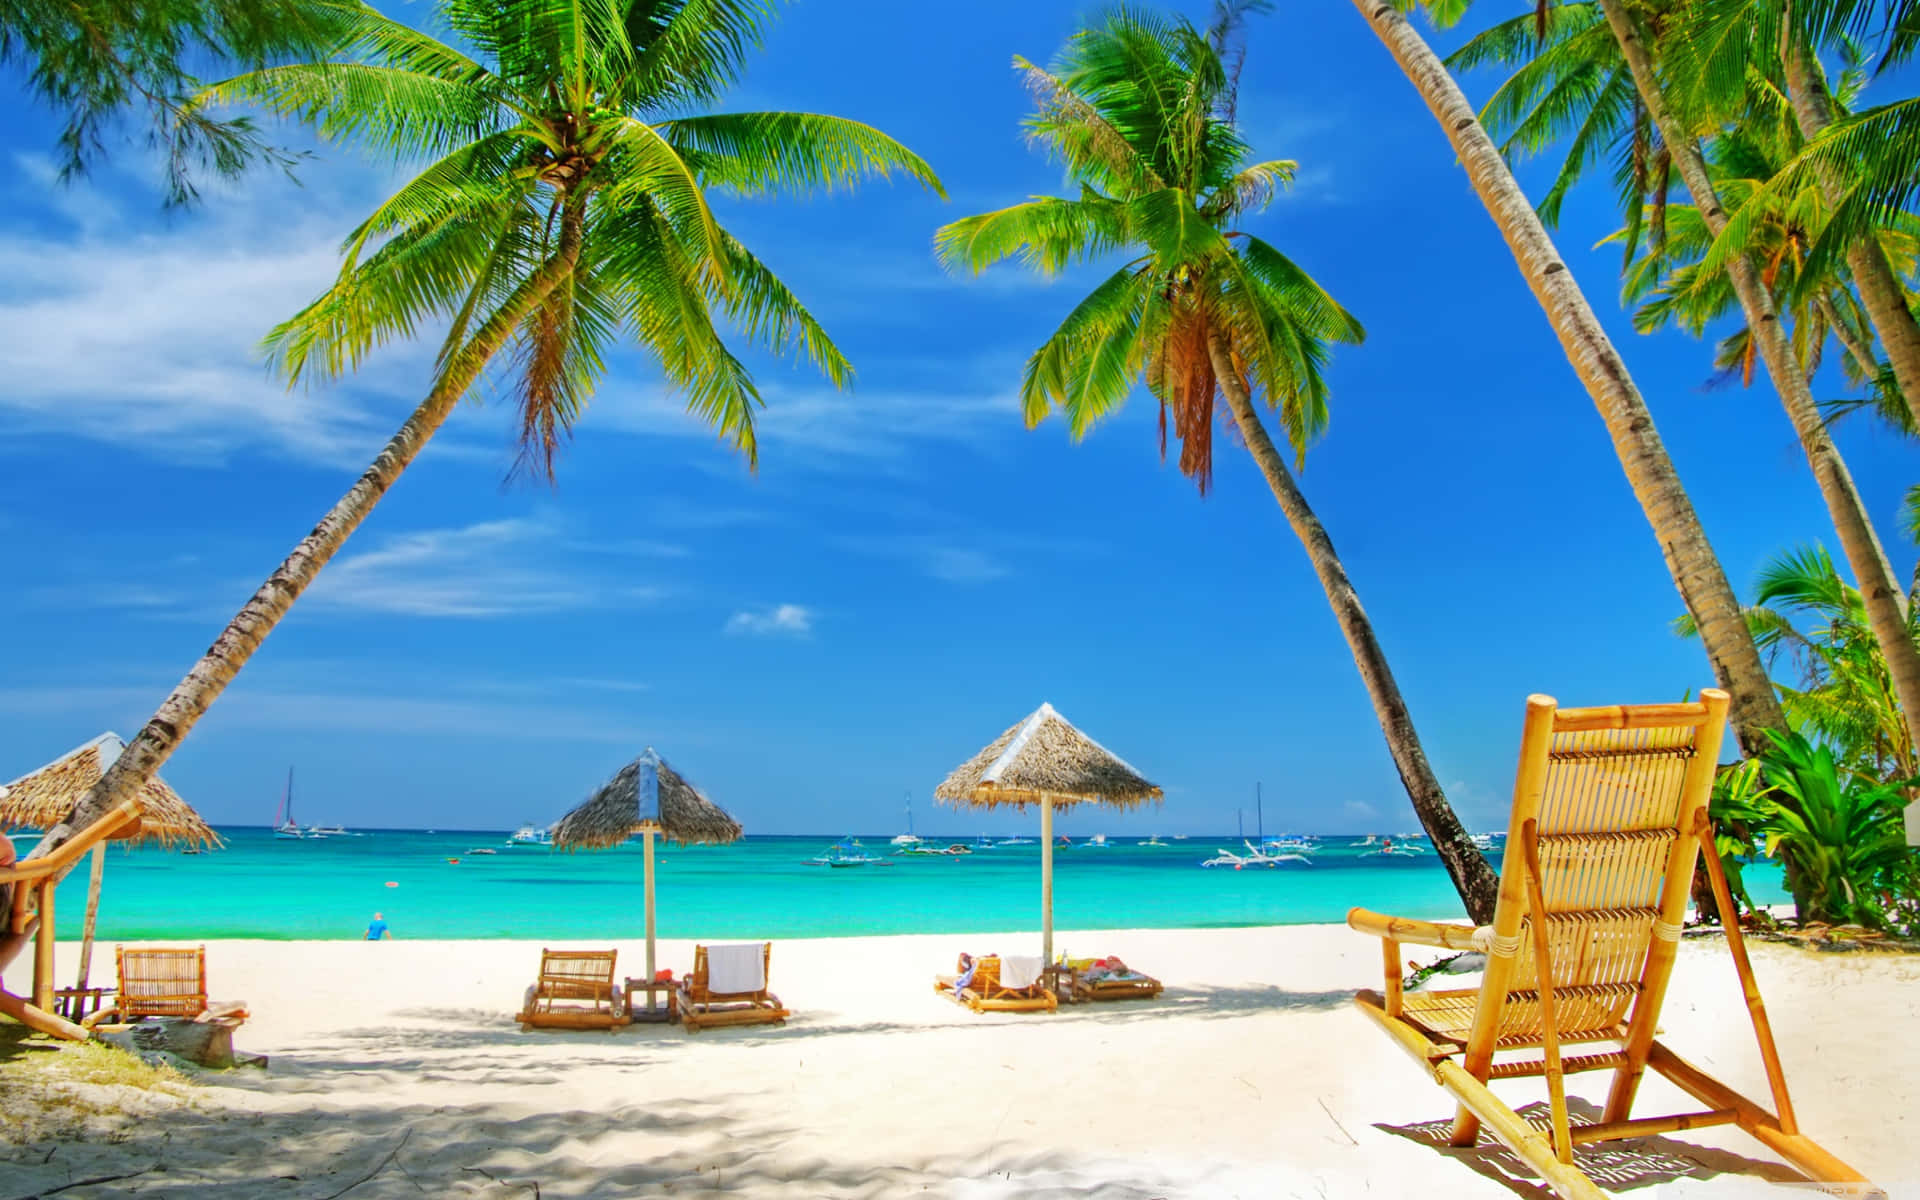 Relax among the beautiful tropical scenery! Wallpaper